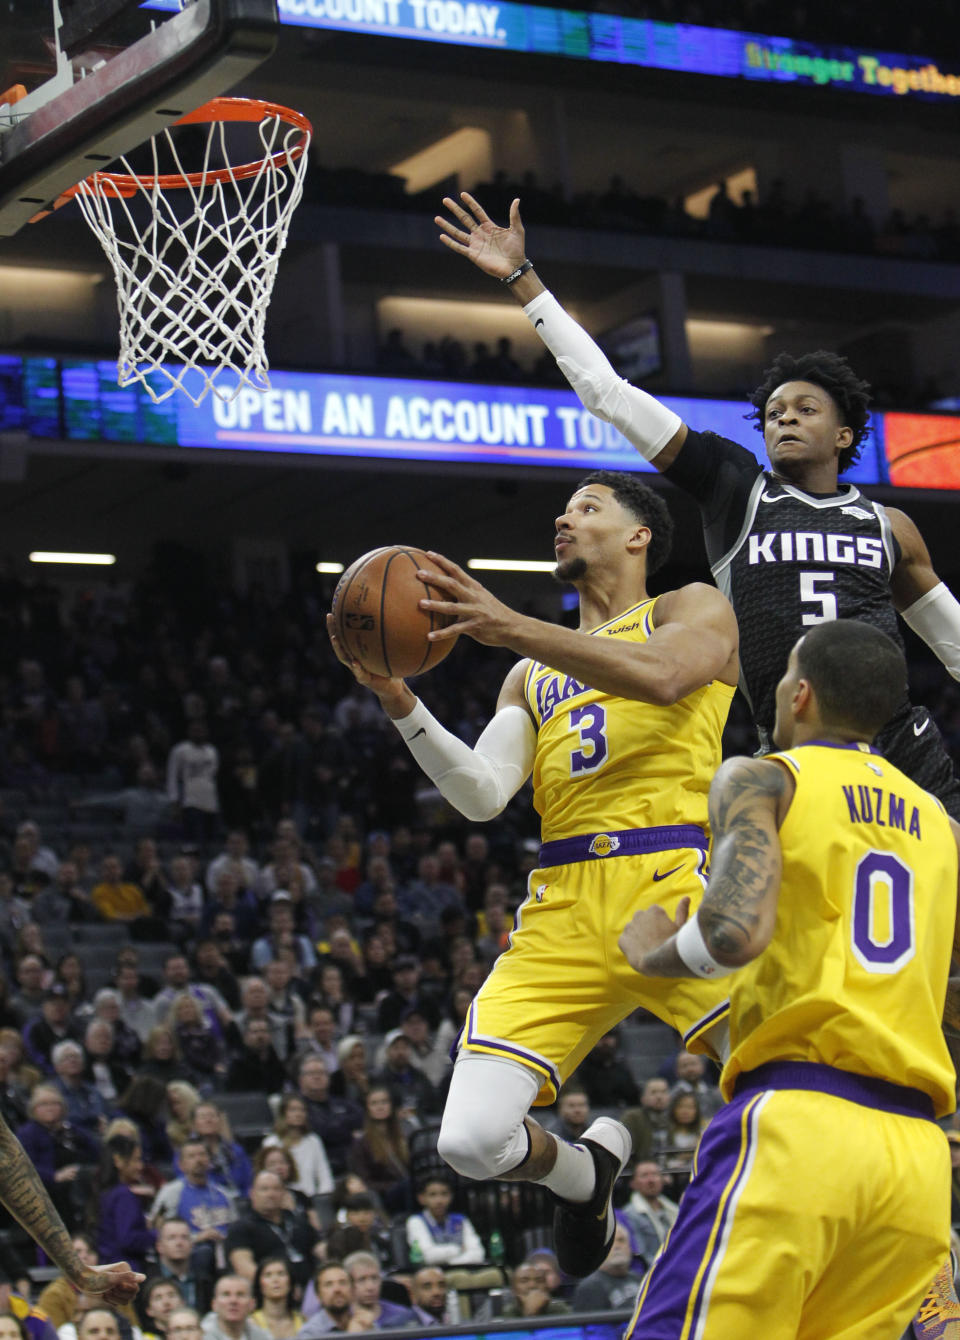 Los Angeles Lakers guard Josh Hart (3) drives to the basket as Sacramento Kings guard De'Aaron Fox (5) defends during the first half of an NBA basketball game in Sacramento, Calif., Thursday, Dec. 27, 2018. (AP Photo/Steve Yeater)